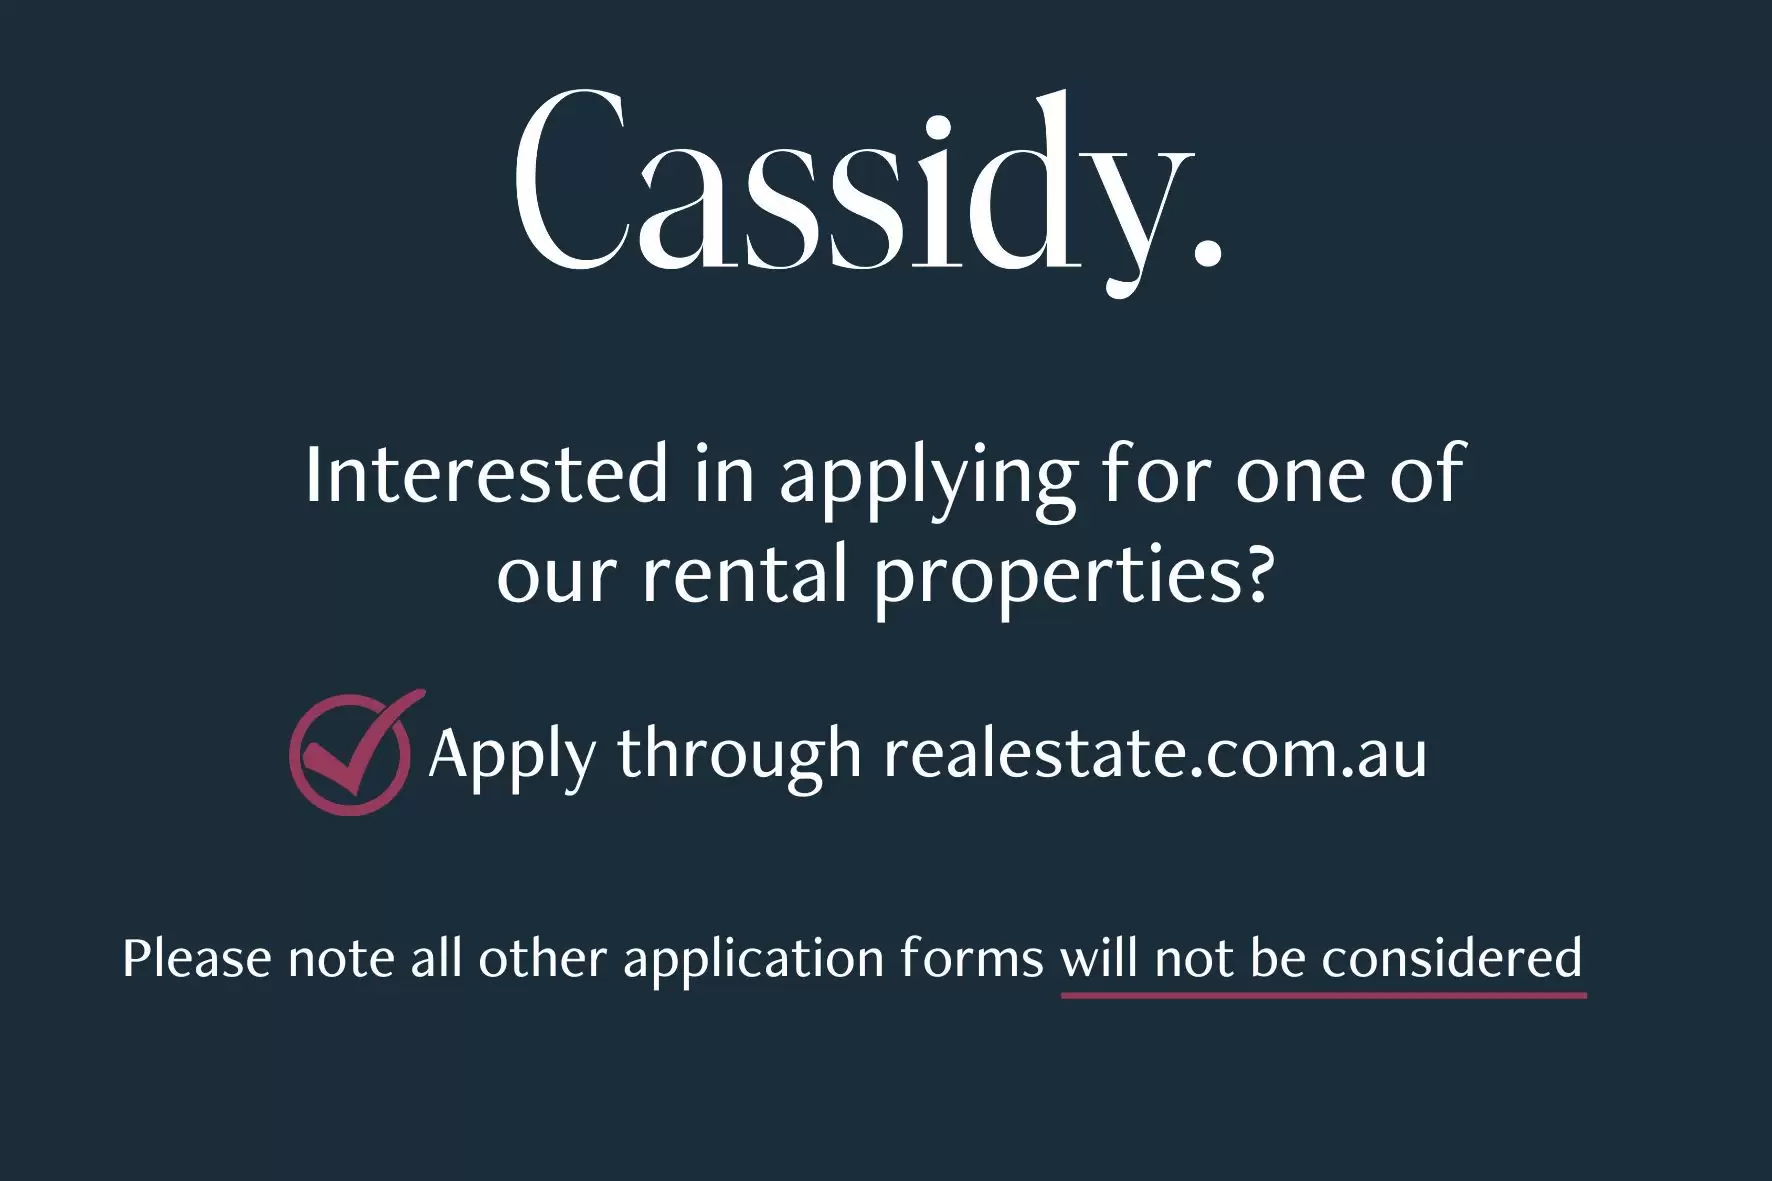 16 Tennyson Road, Gladesville For Lease by Cassidy Real Estate - image 1